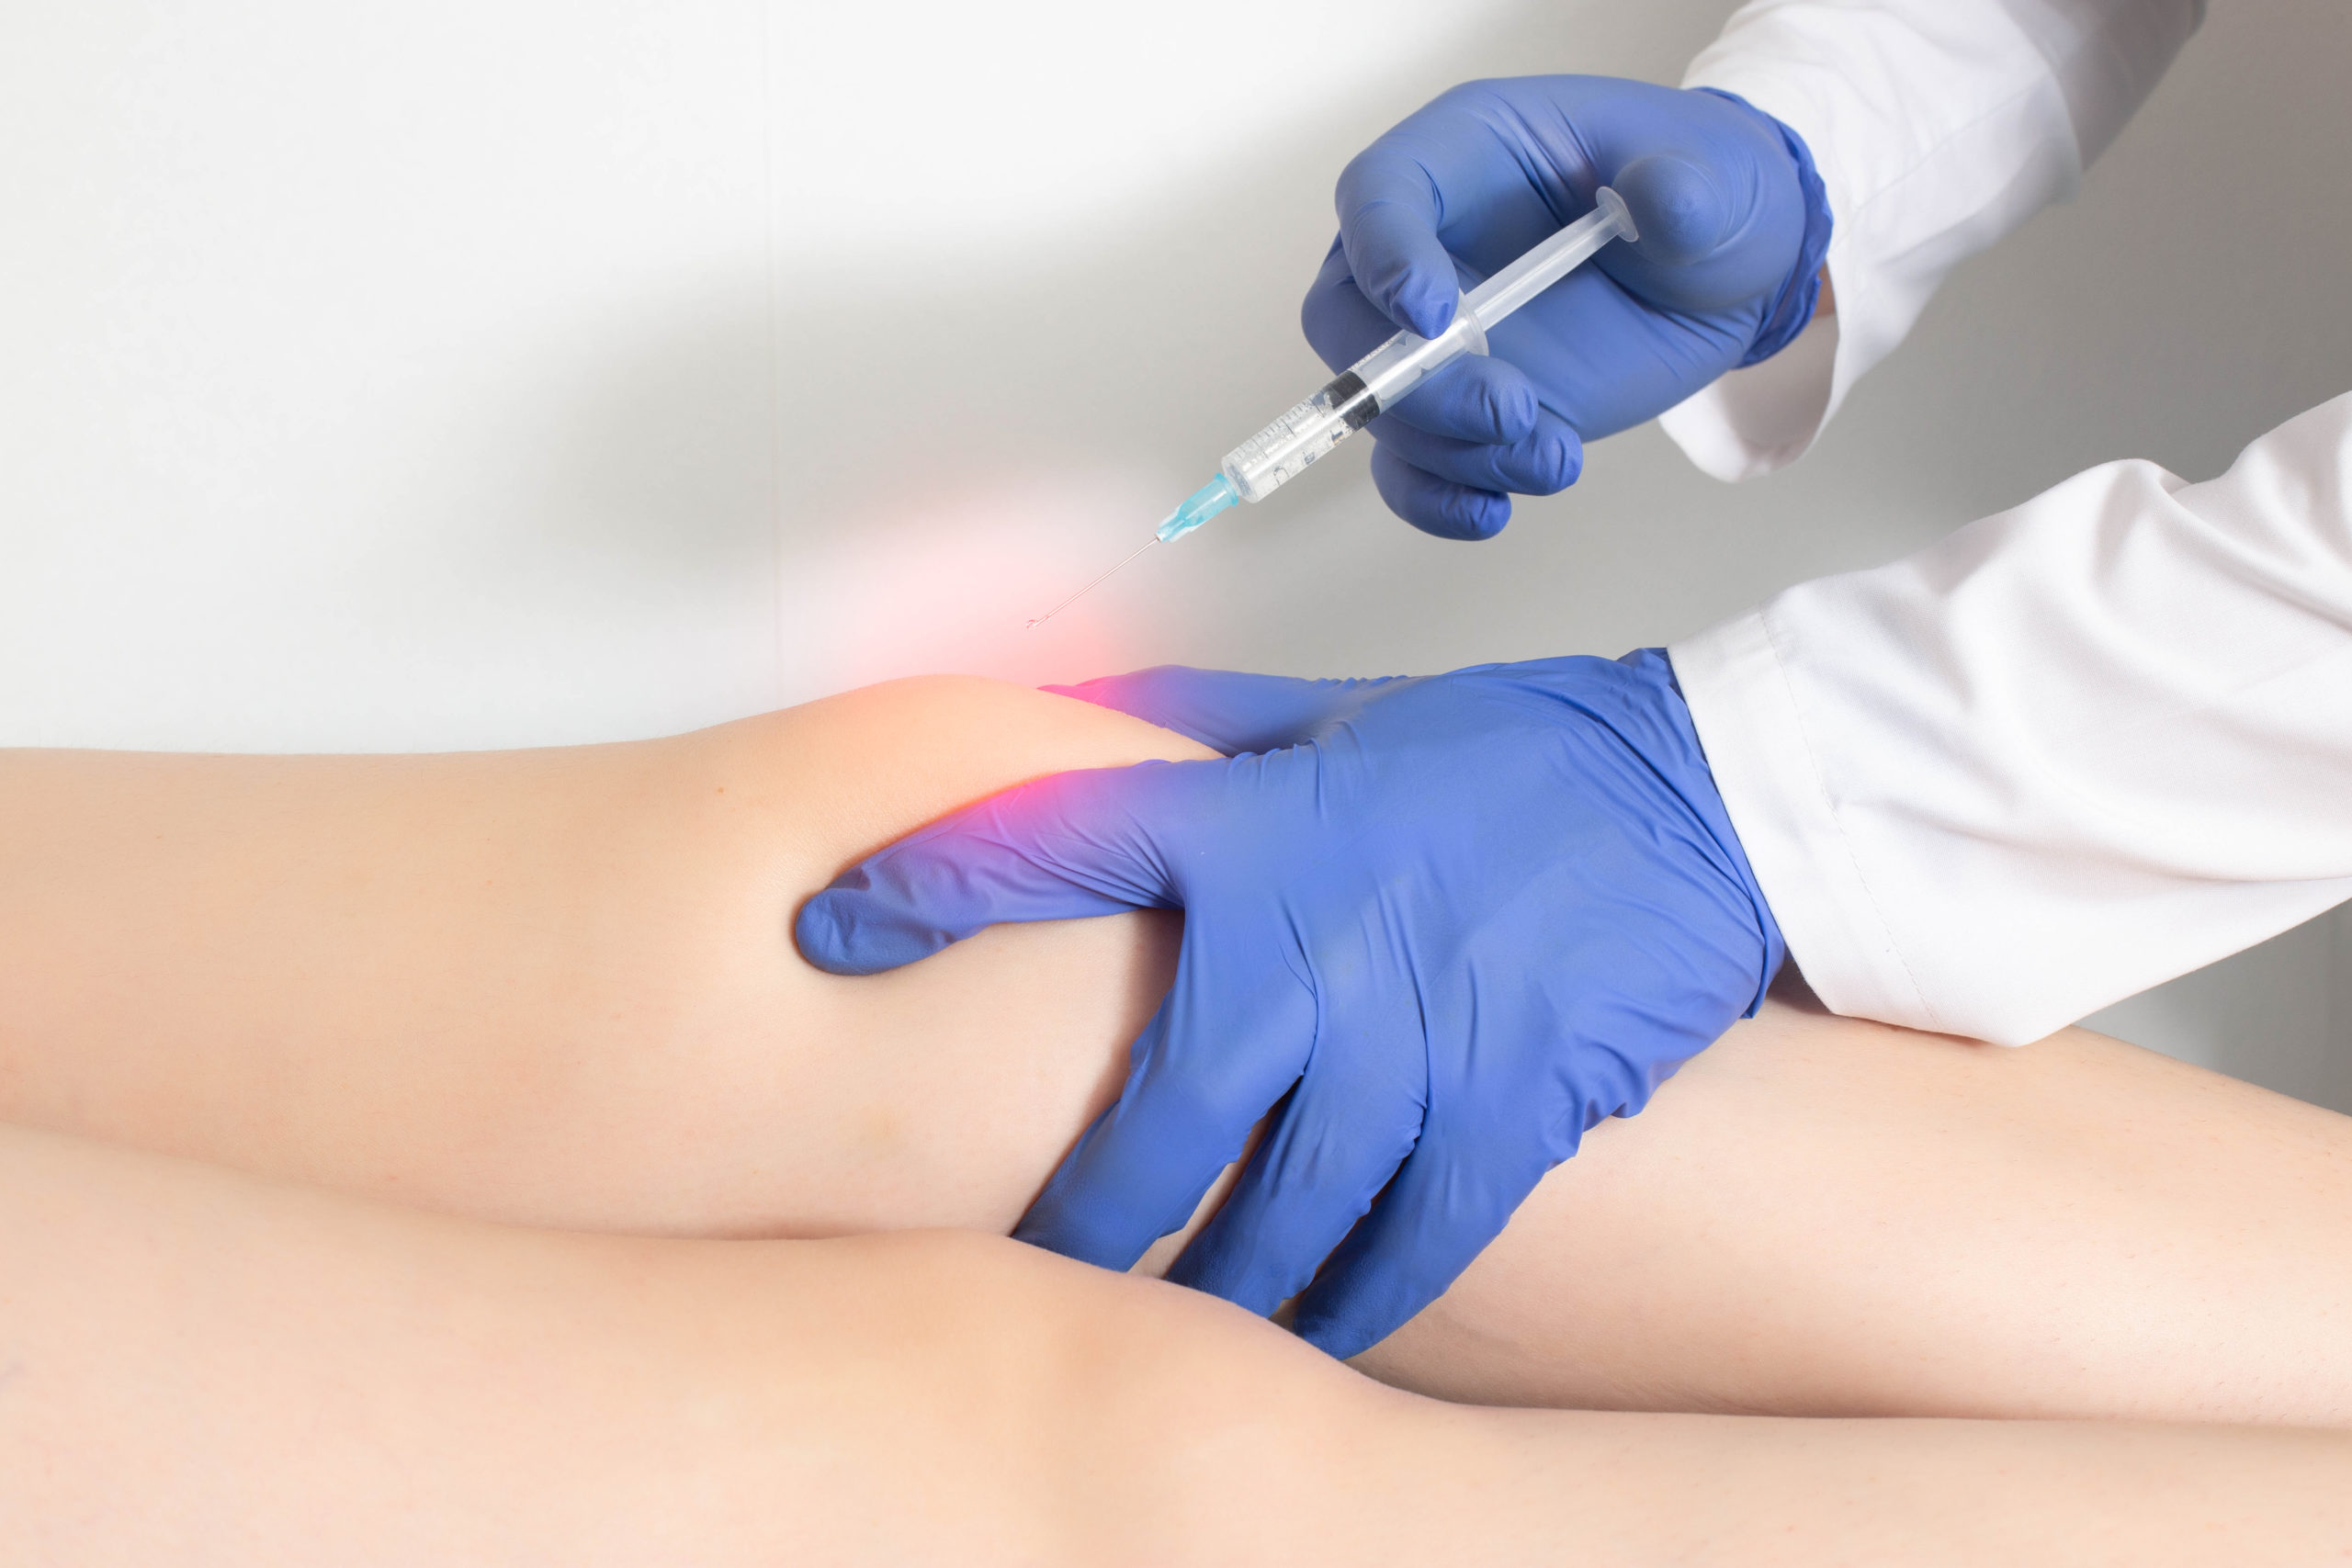 The doctor injects an ozone-oxygen mixture into the patient's knee joint to relieve muscle spasm and inflammation.